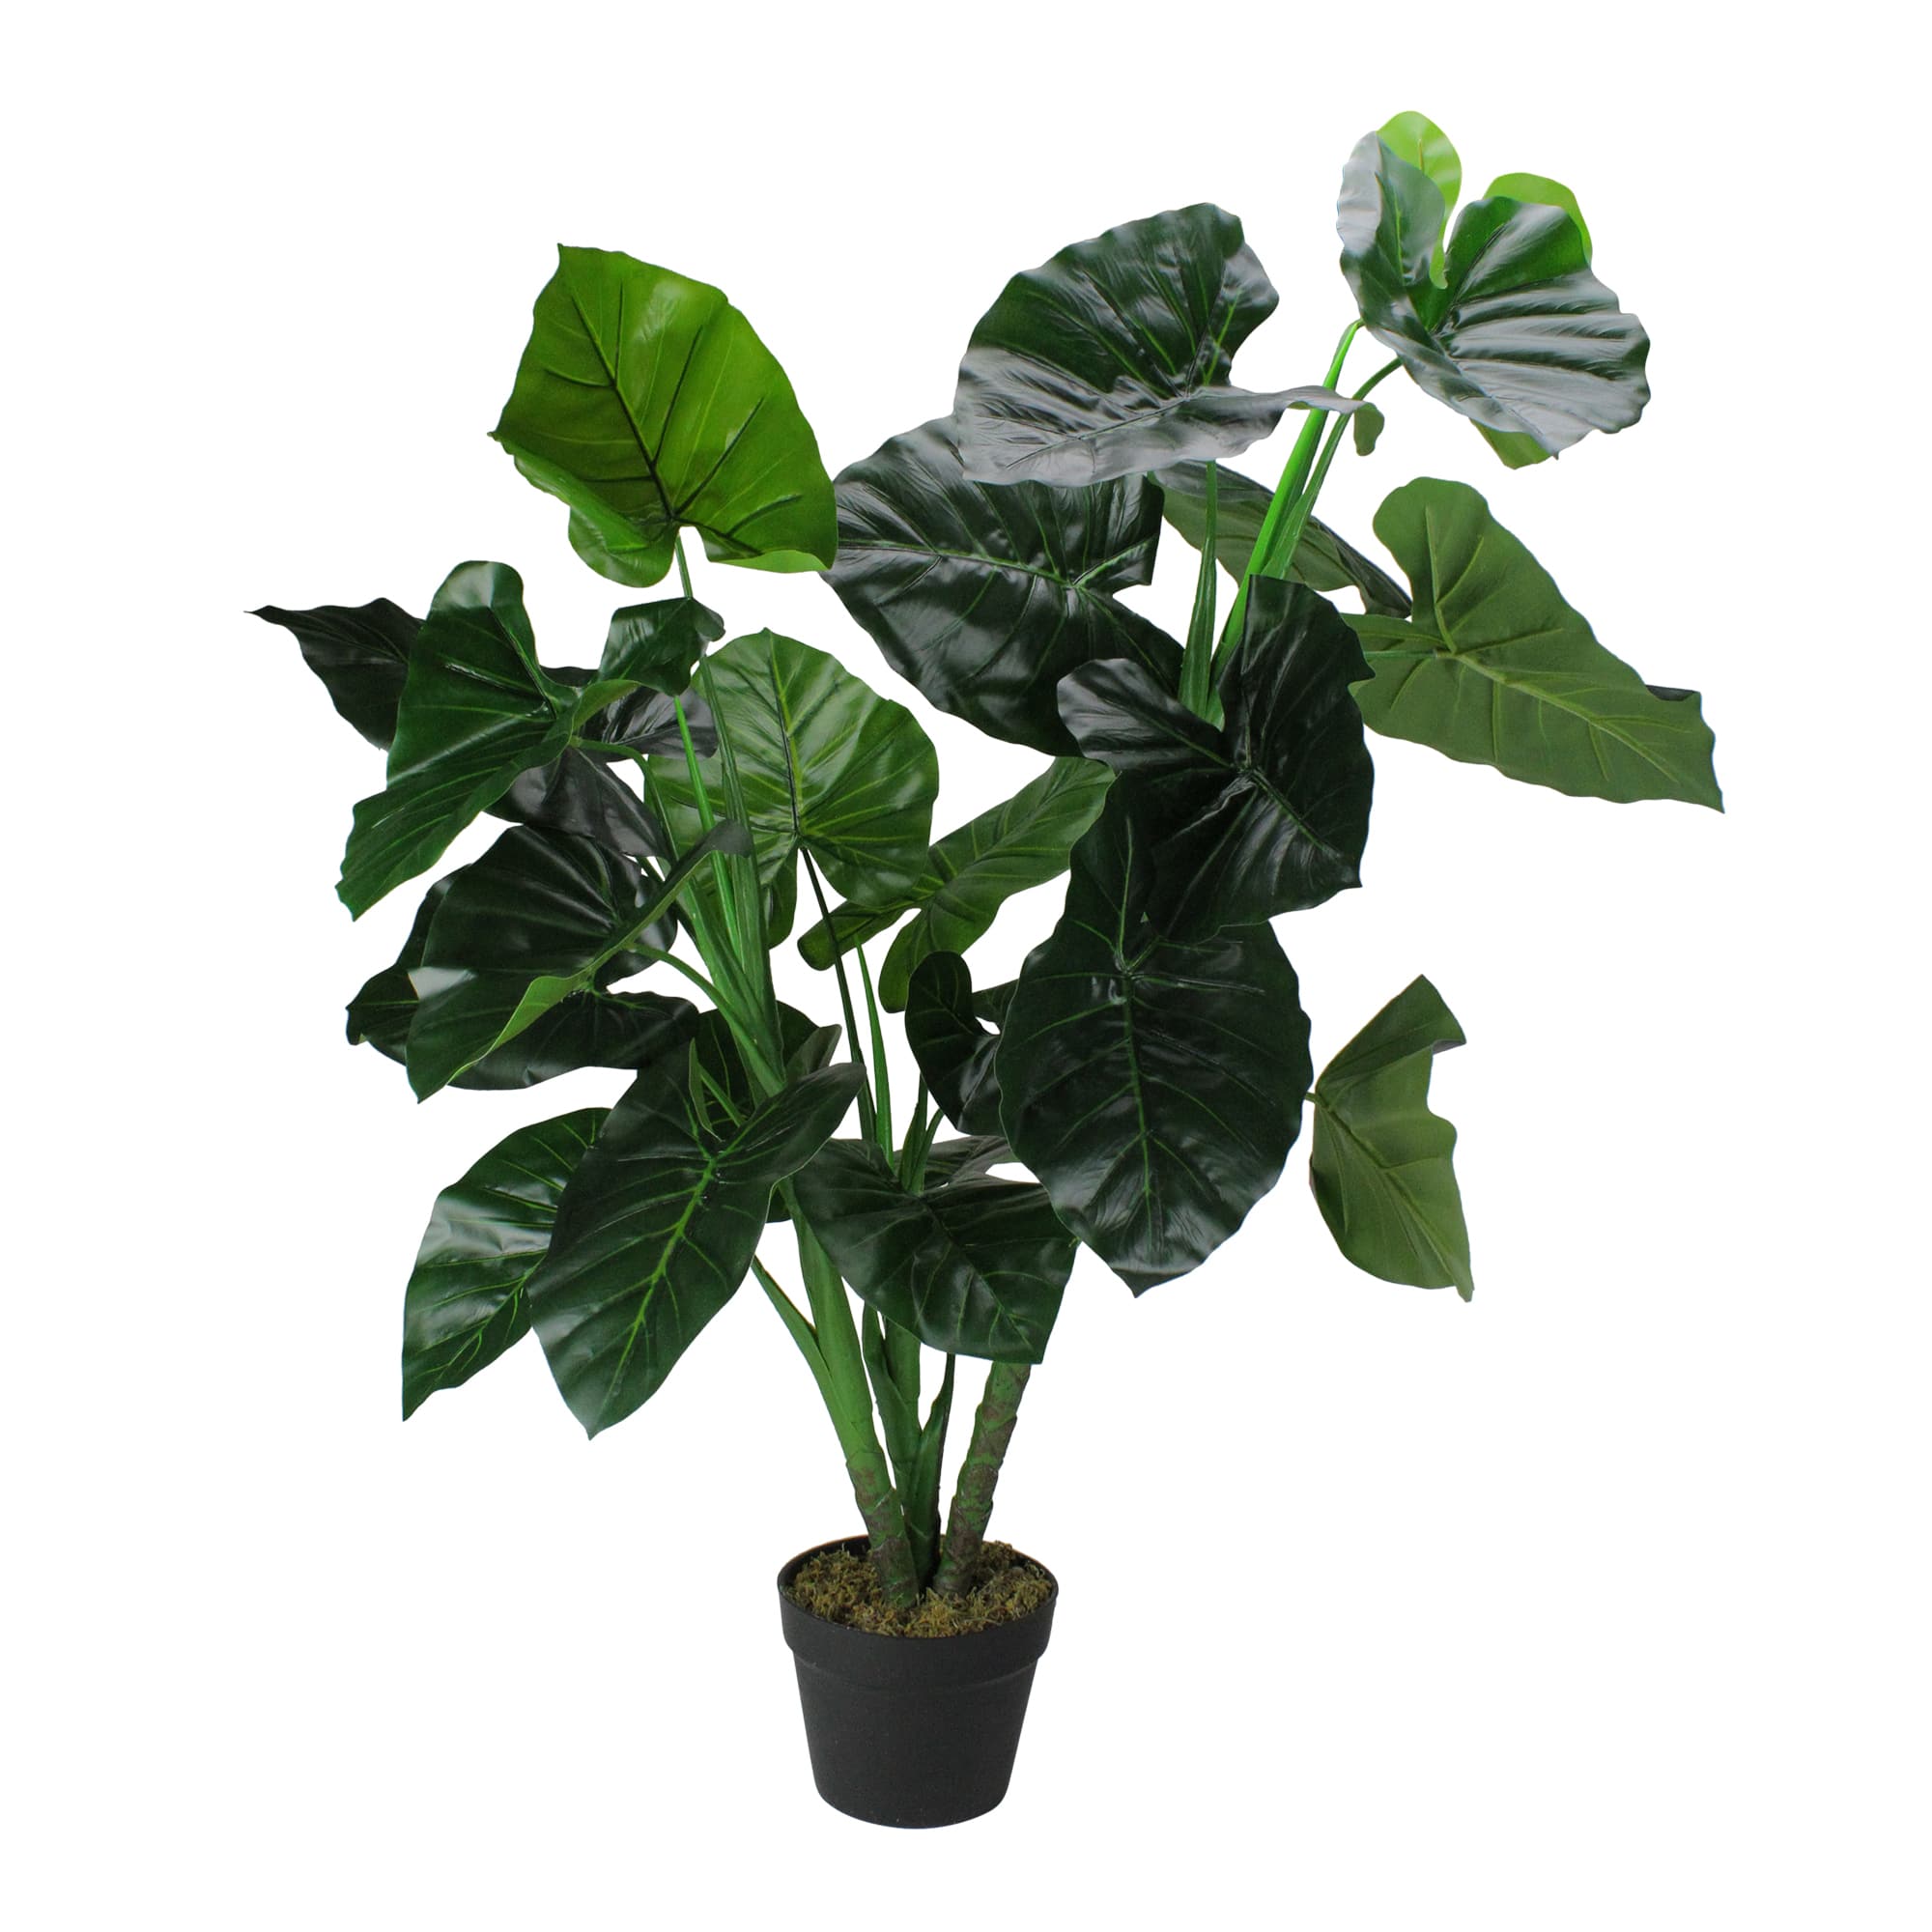 4 ft. Two-Tone Potted Wide Taro Leaf Plant